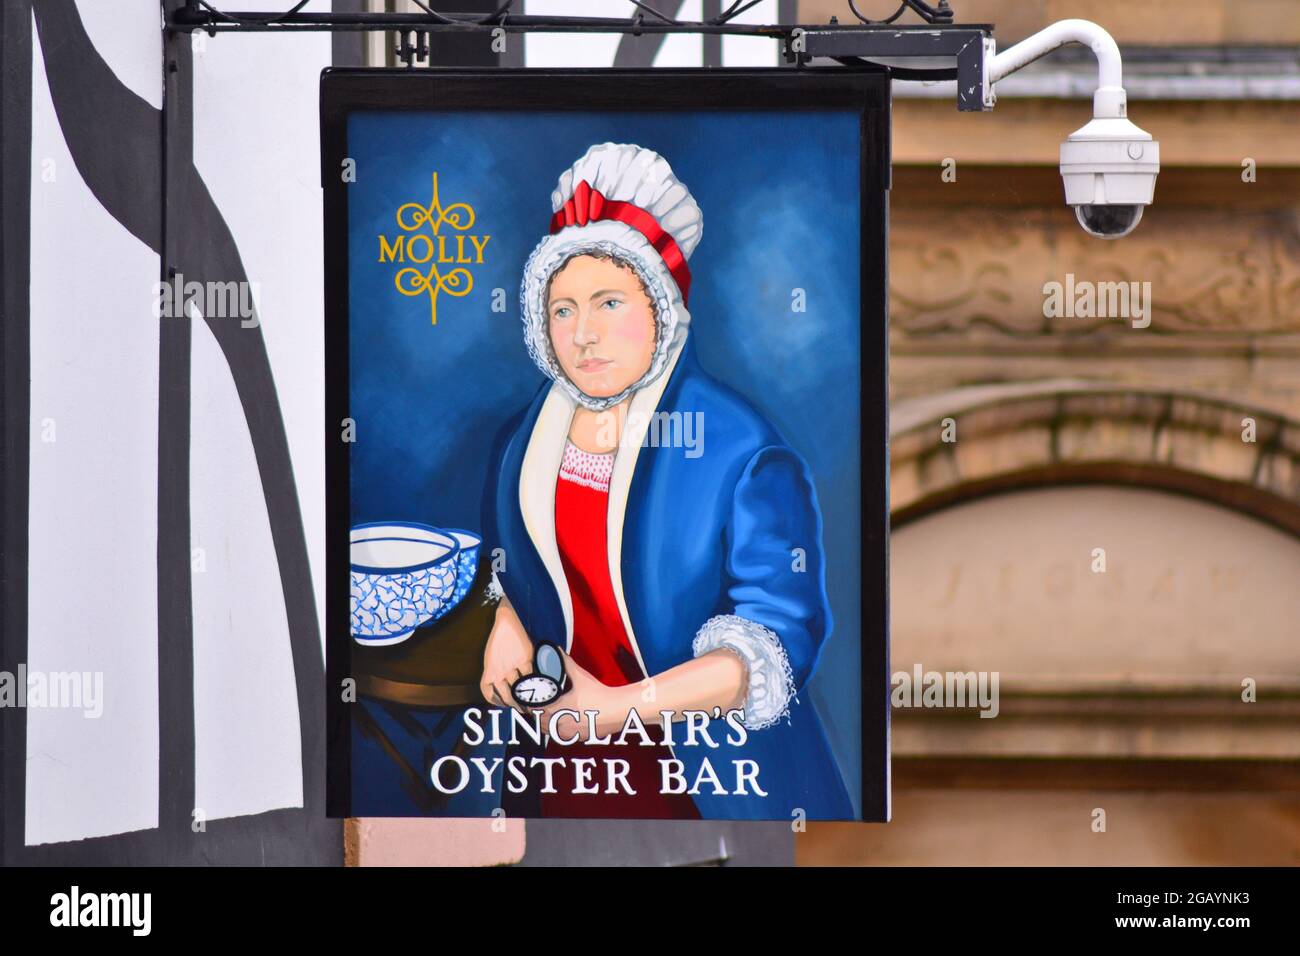 Sign on Sinclair's Oyster Bar, pub and eatery, central Manchester, England, United Kingdom, Stock Photo